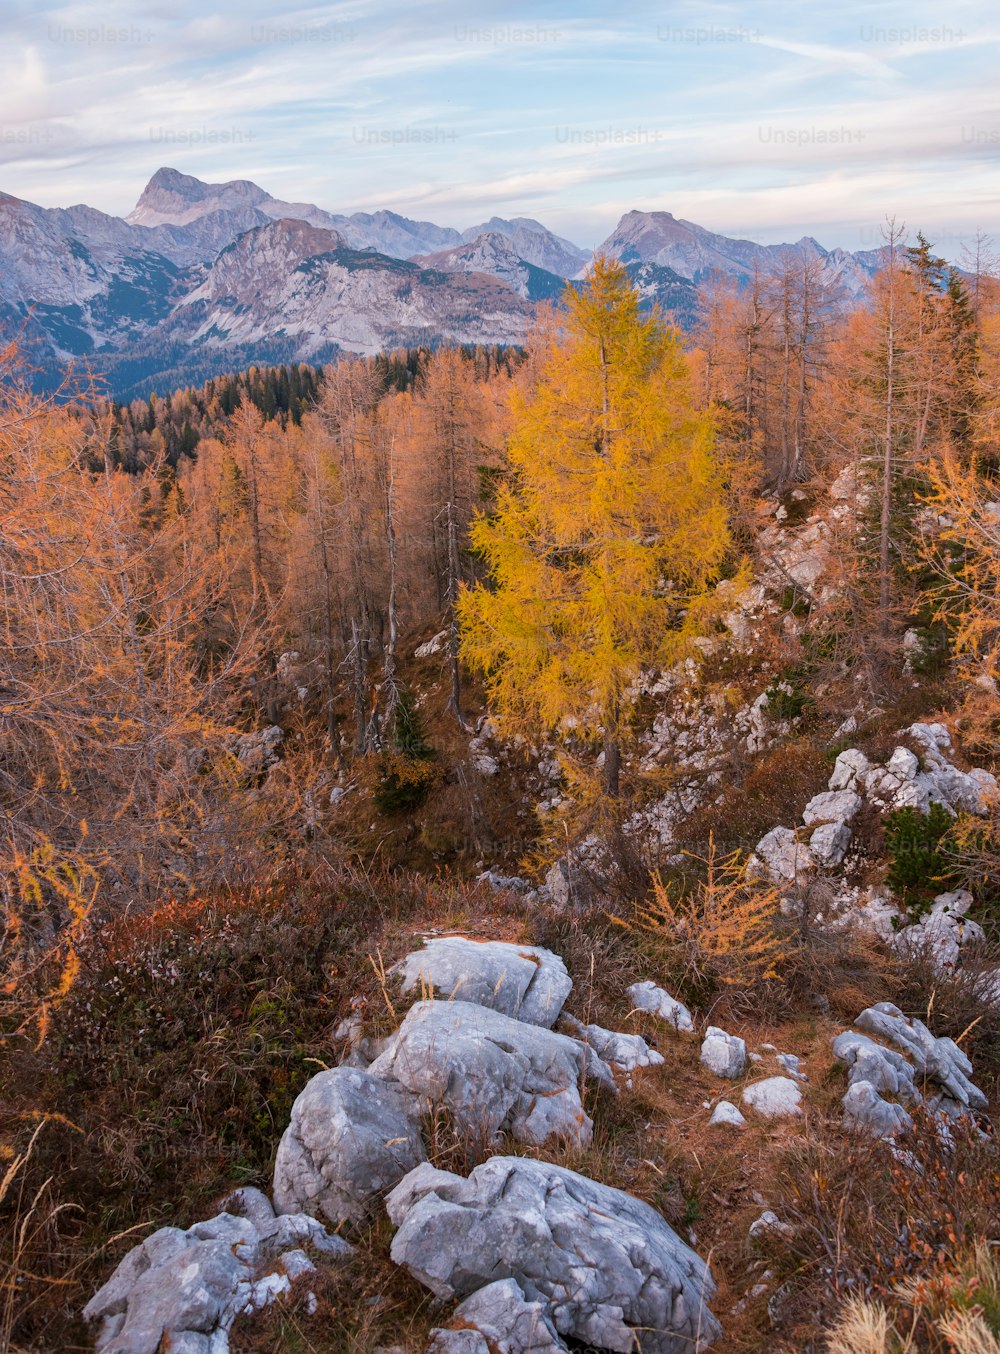 a view of the mountains and trees in autumn